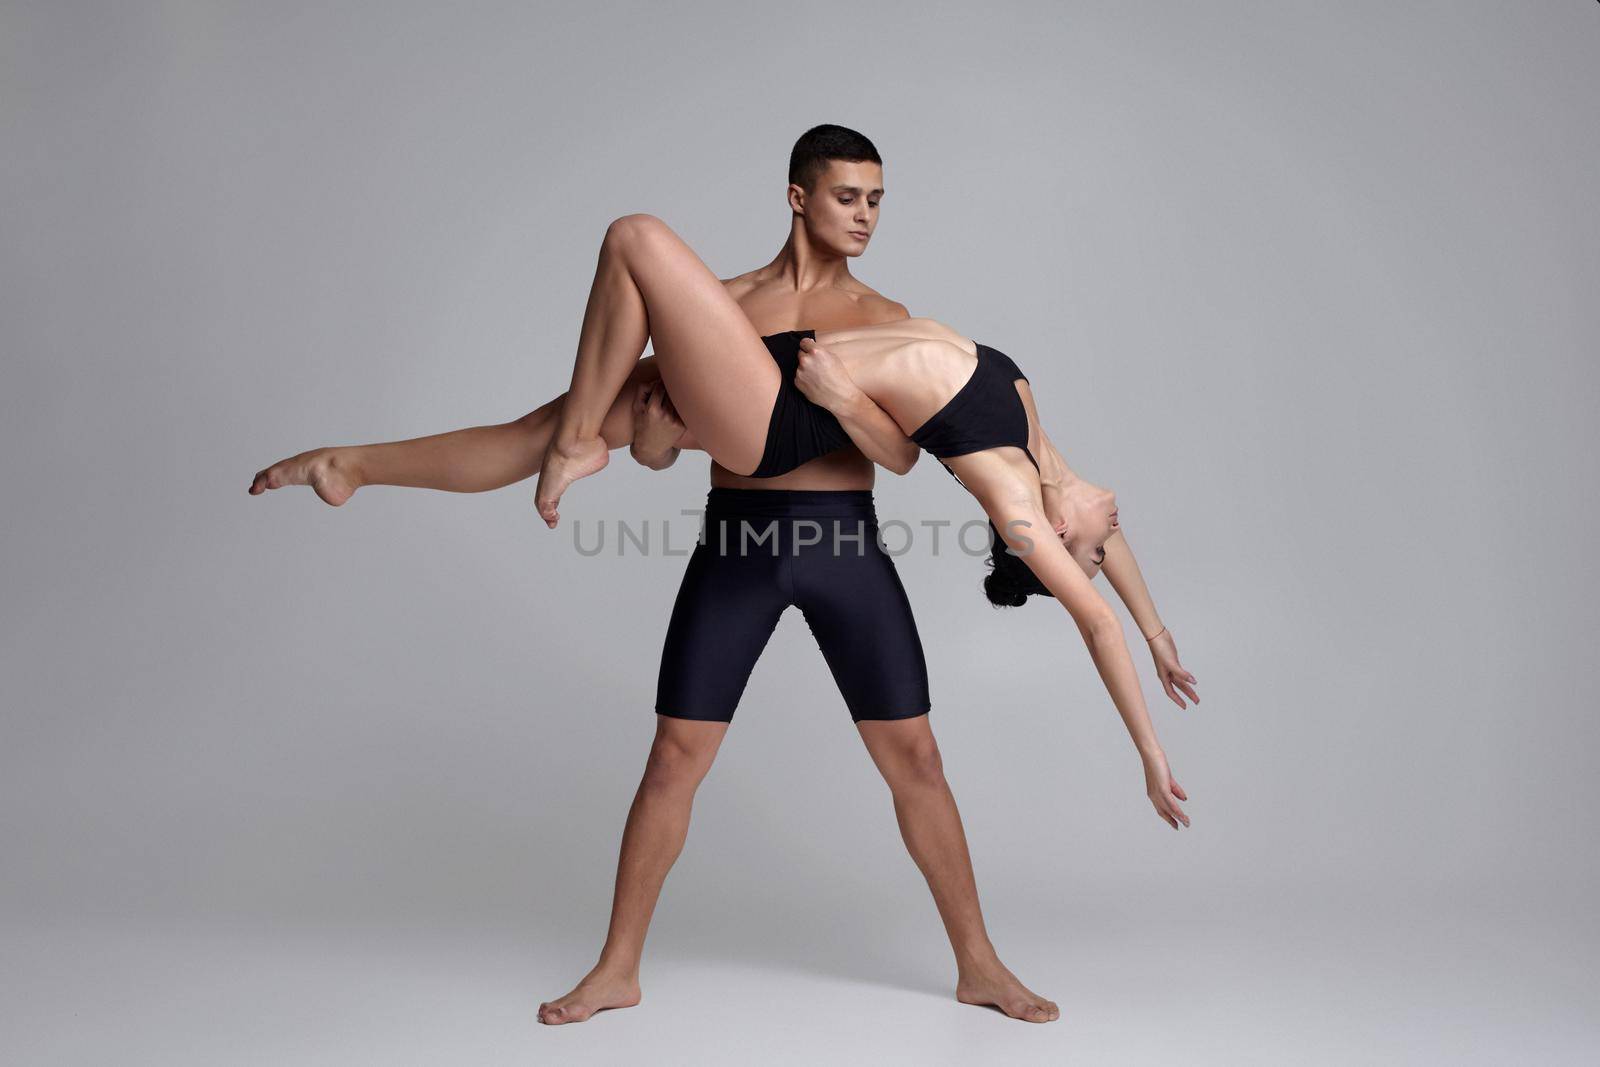 The couple of a young modern ballet dancers in black suits are posing over a gray studio background. by nazarovsergey